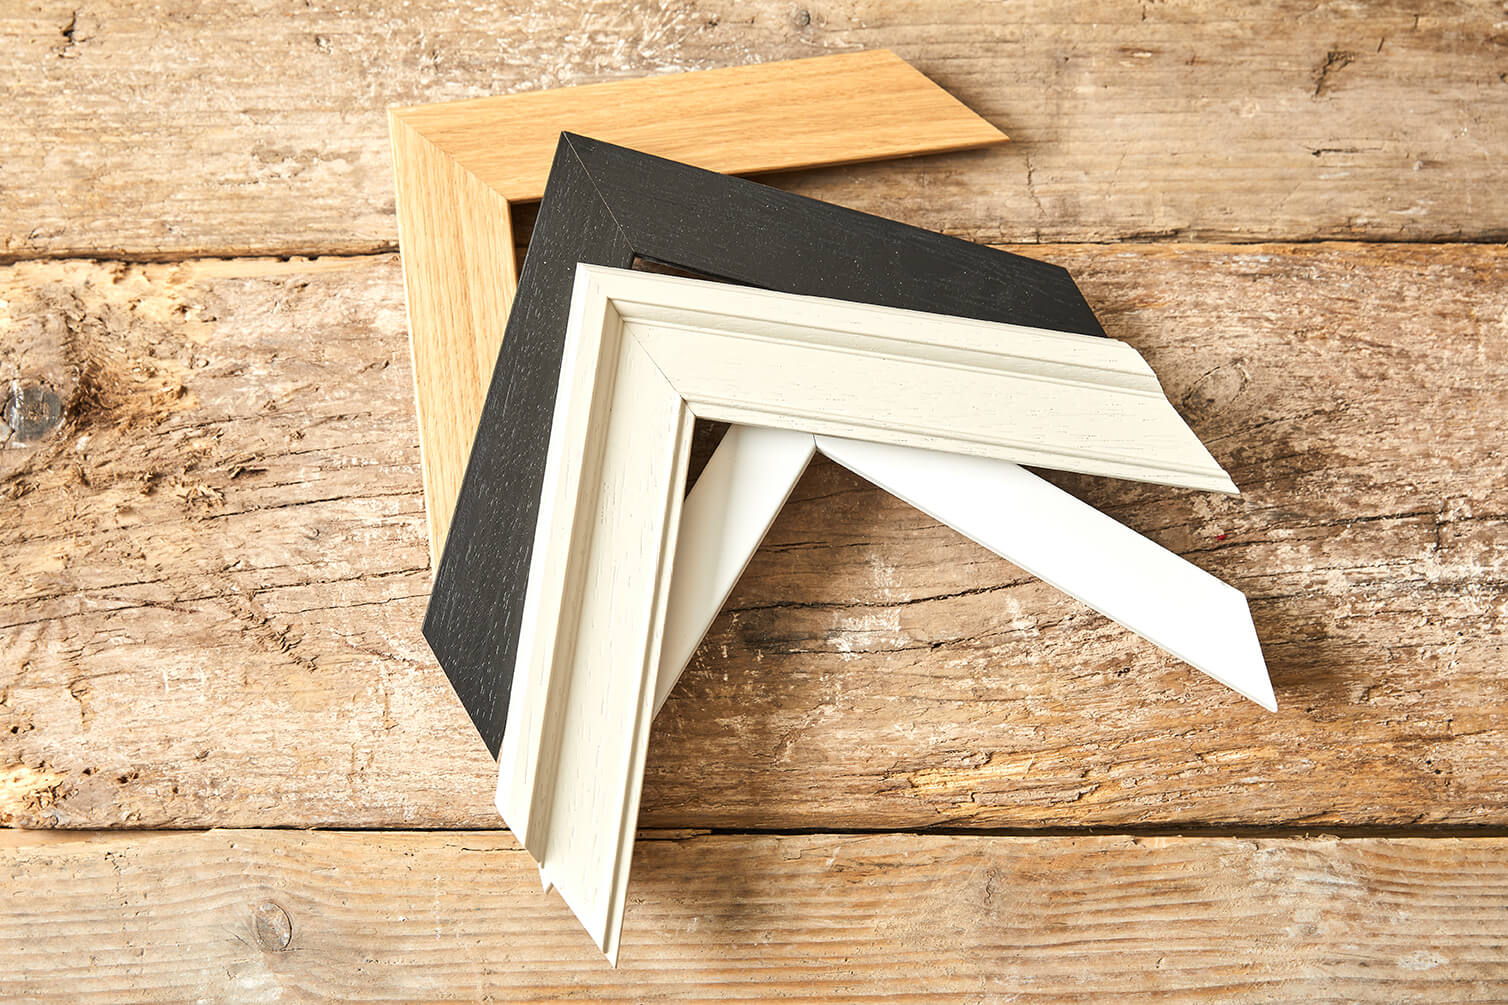 Create your custom frames with personalised moulding to make the perfect made to measure frames